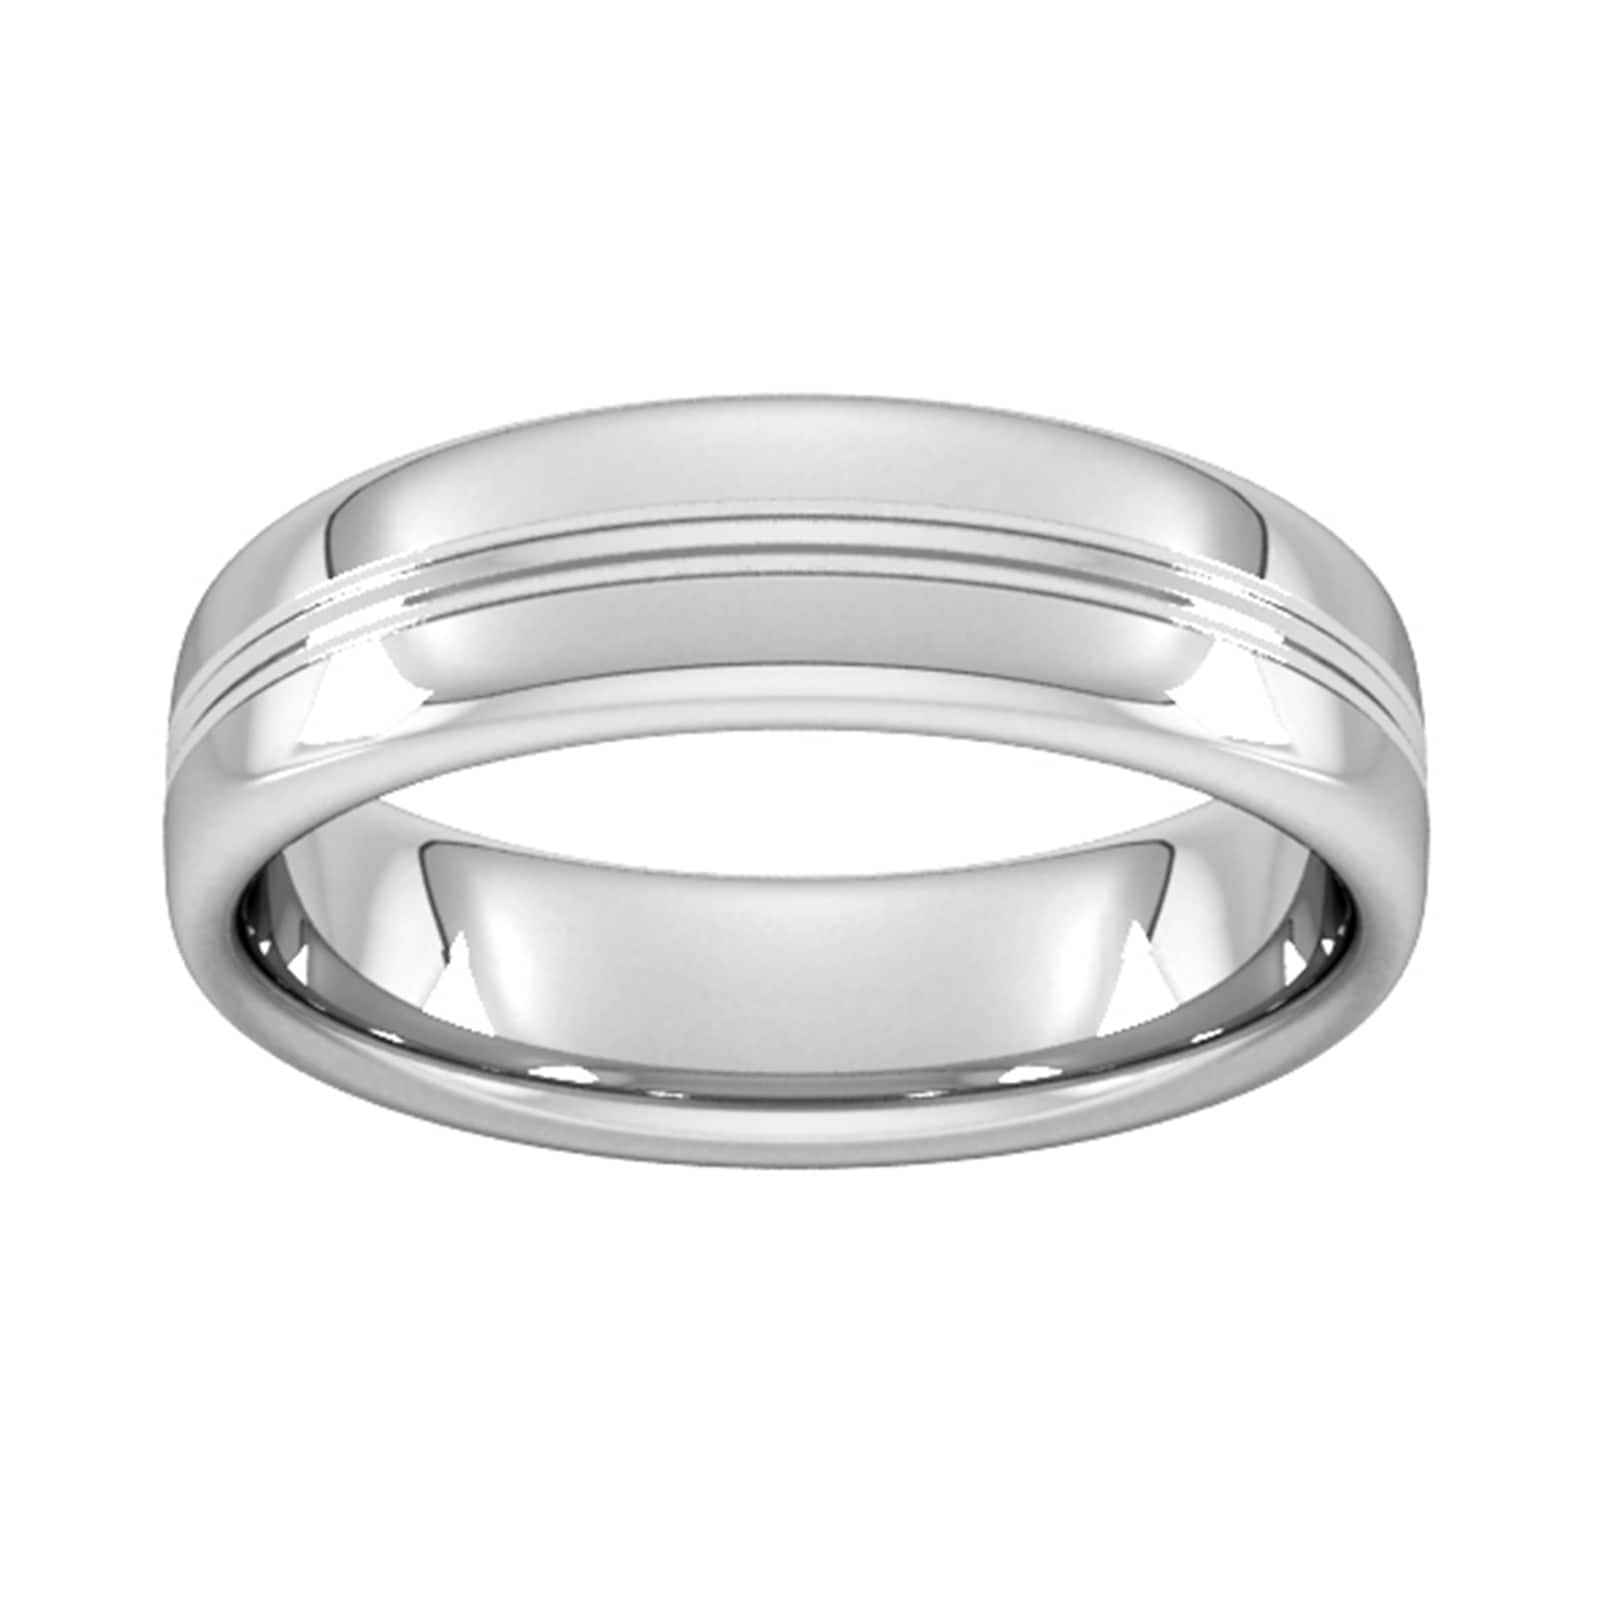 6mm Slight Court Heavy Grooved Polished Finish Wedding Ring In 950 Palladium - Ring Size X